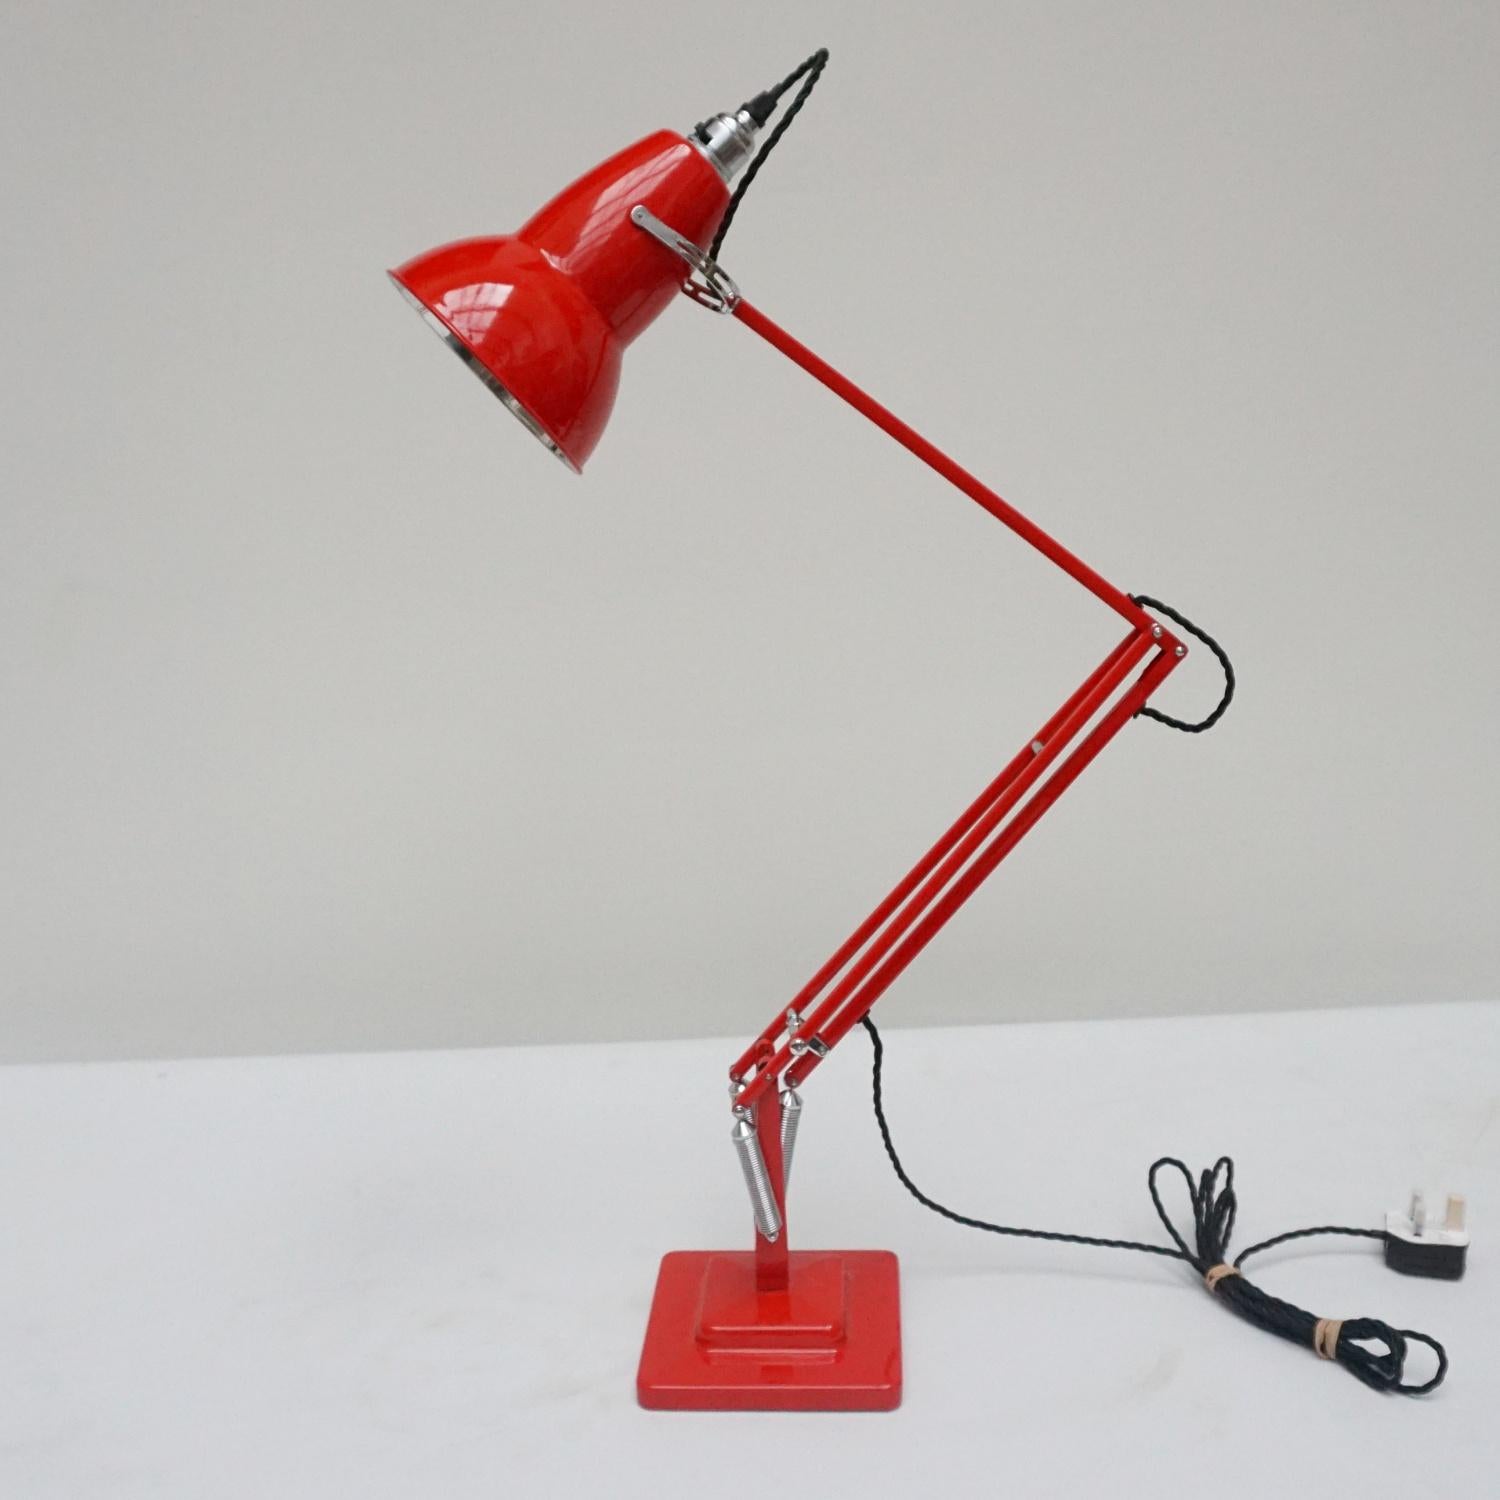 'Three-spring' chromed and polished red painted Anglepoise desk lamp by Herbert Terry & Sons. Two step base and perforated lamp shade. Original stamps to stem. The three spring Anglepoise lamp was first released by Herbert Terry &Sons in 1935.